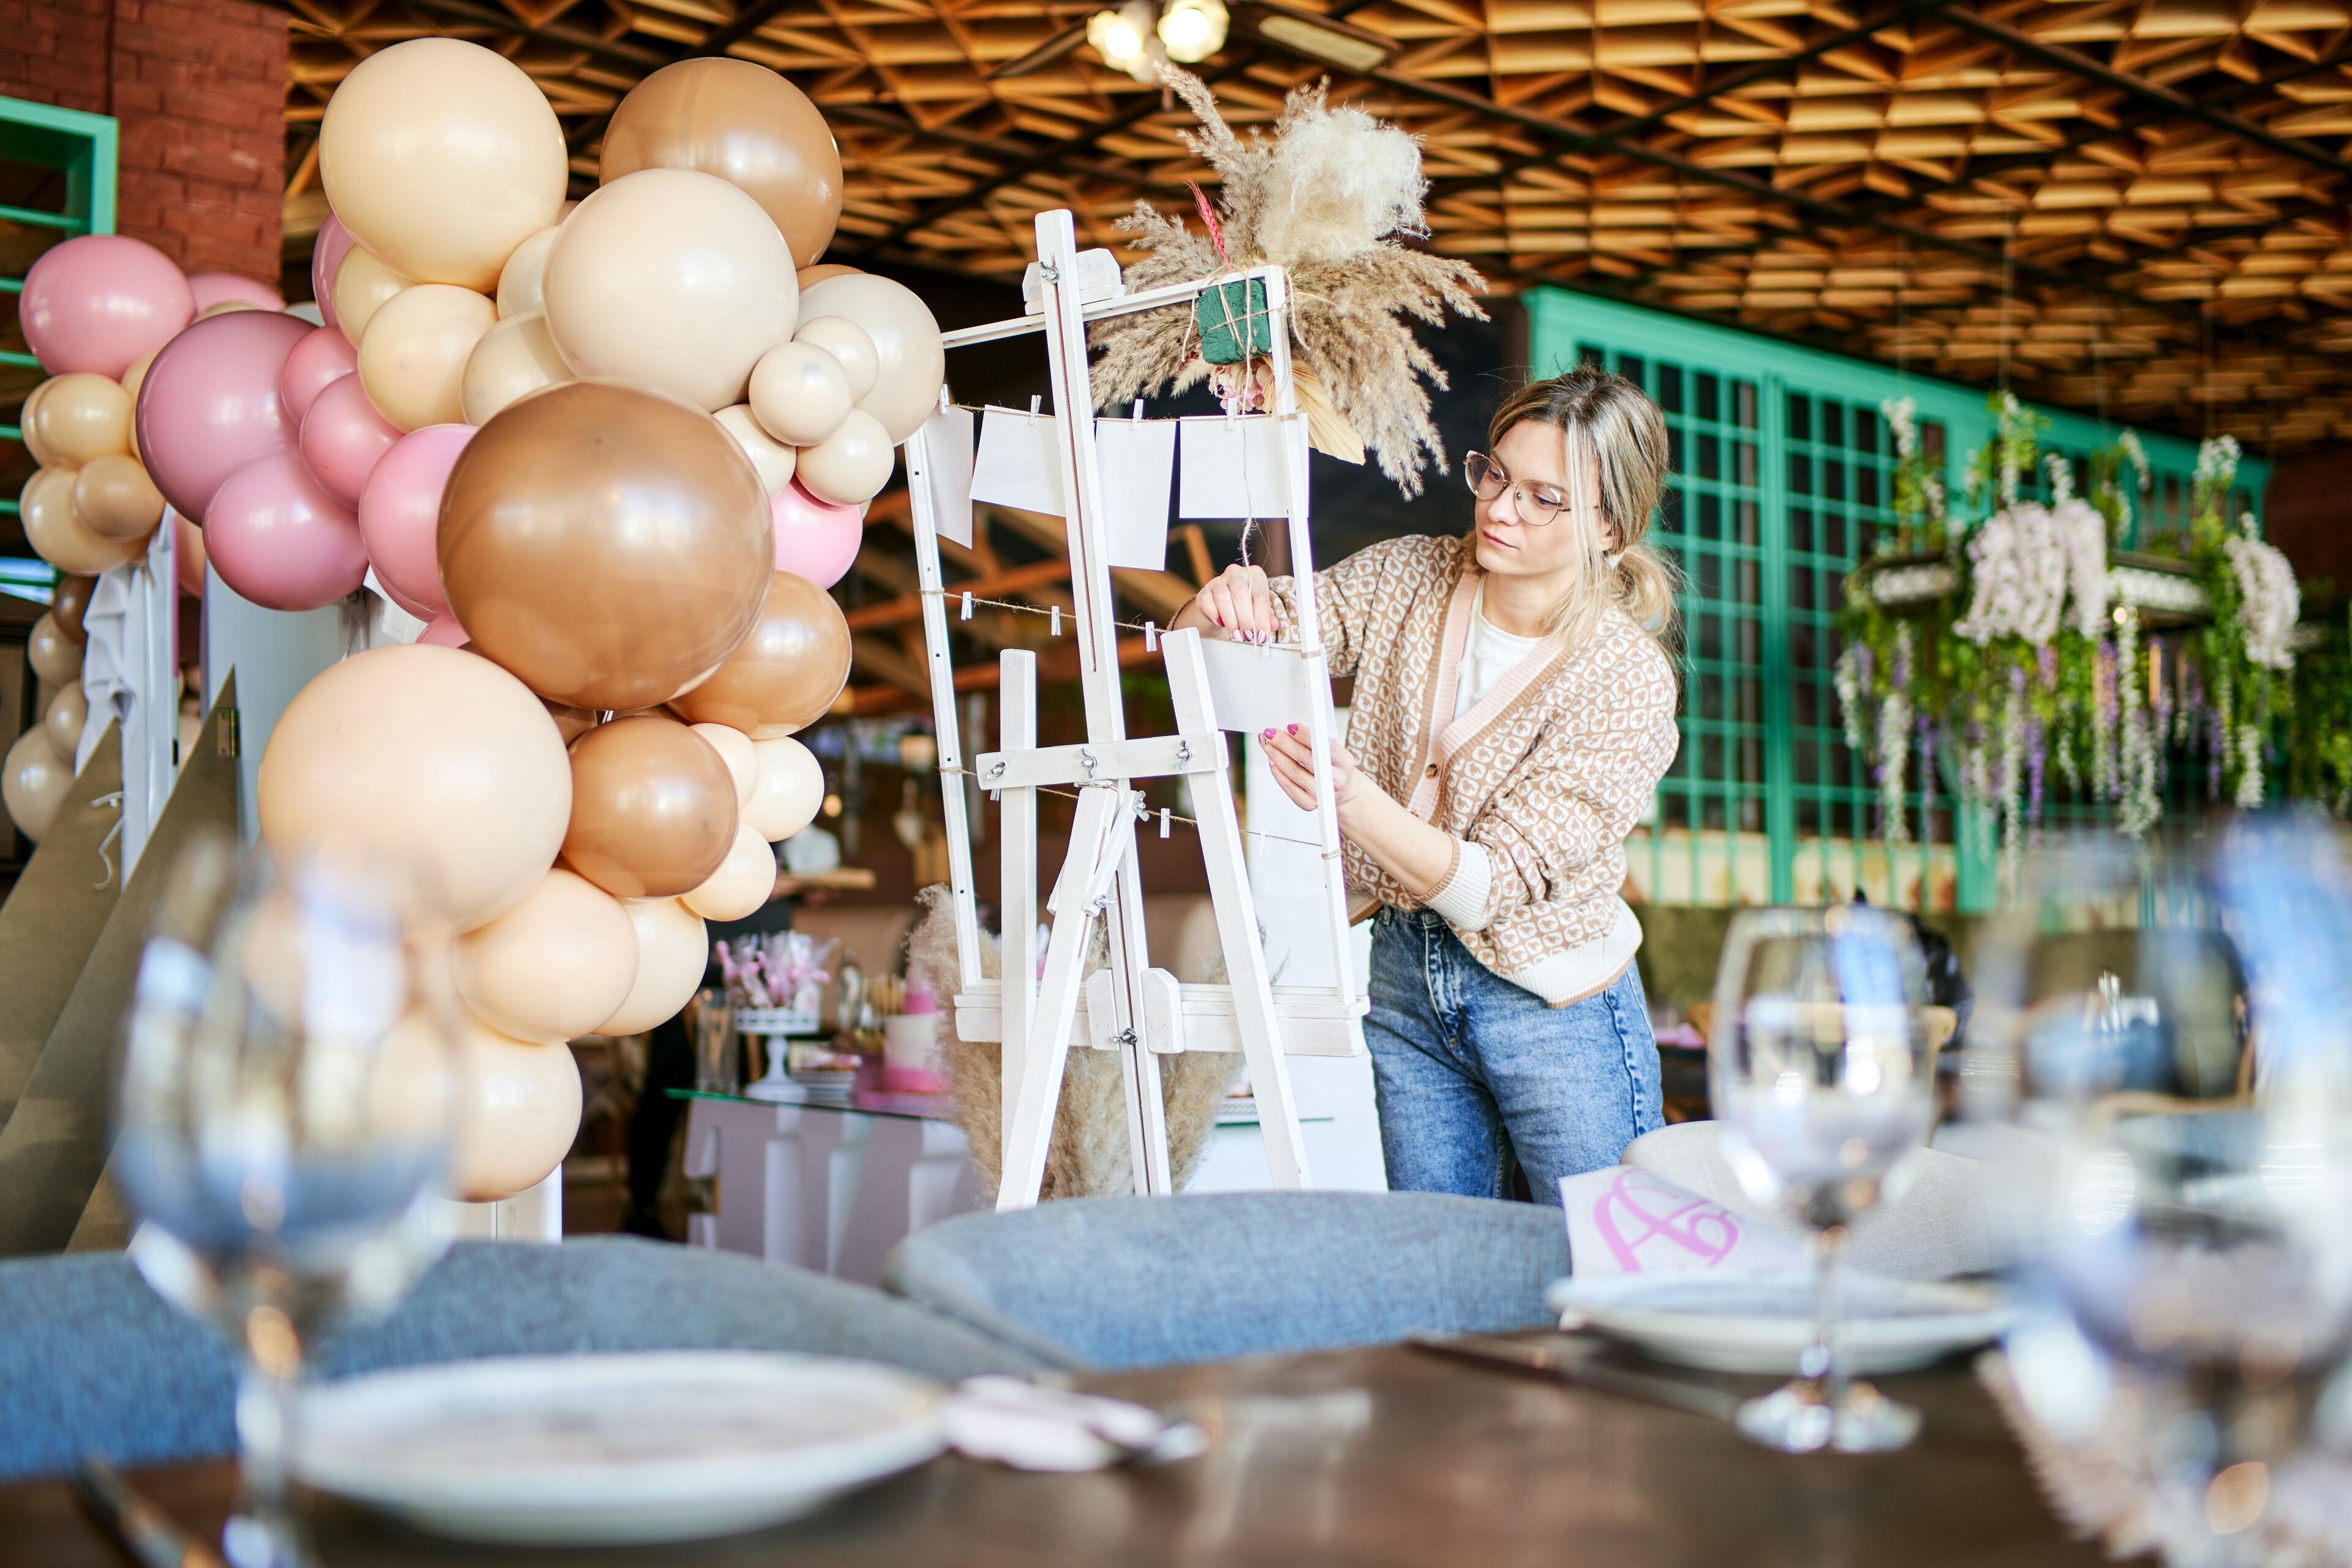 A focused event planner adjusts decorations on a white easel amid a festive setting with balloons and elegant table settings.

